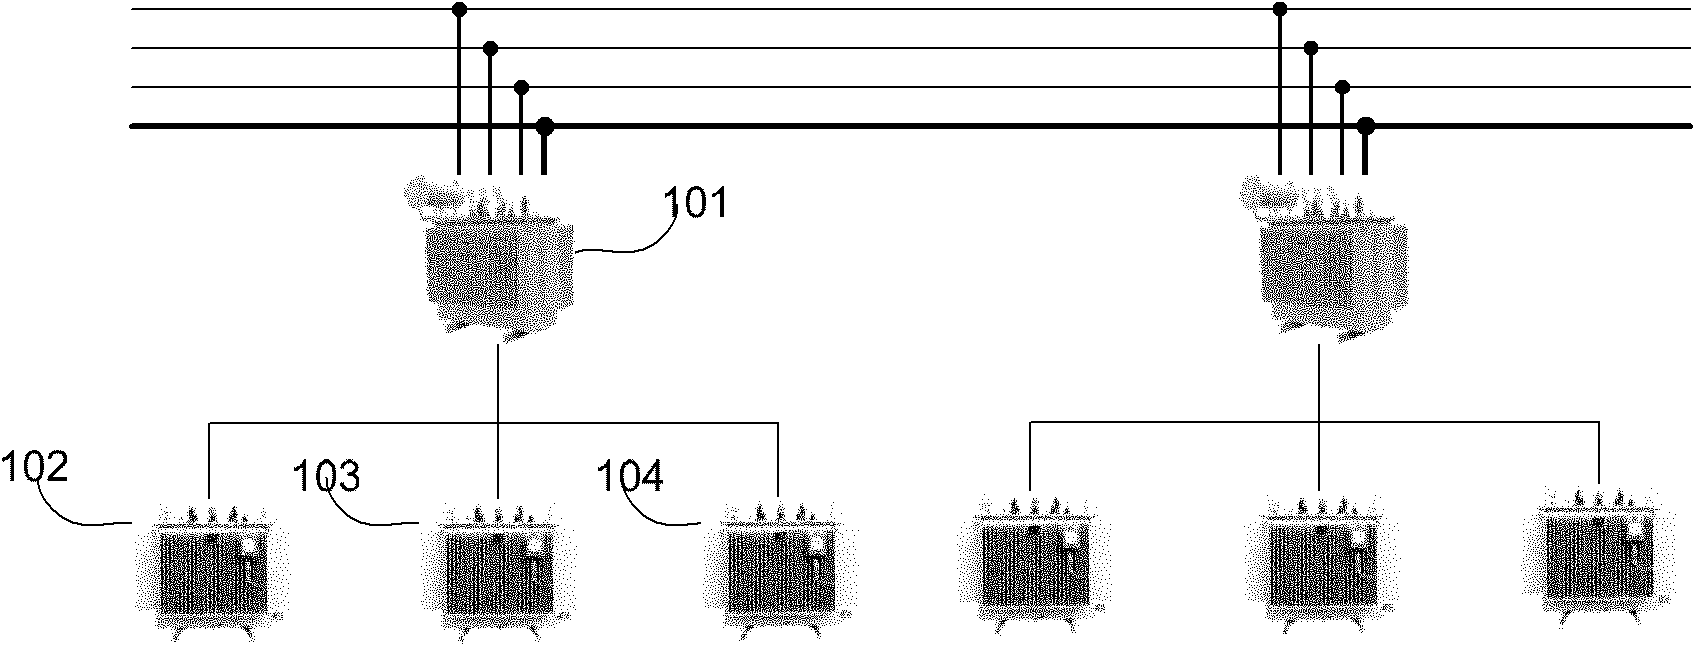 Cellular power supply network, intelligent gateway thereof and power supply control method